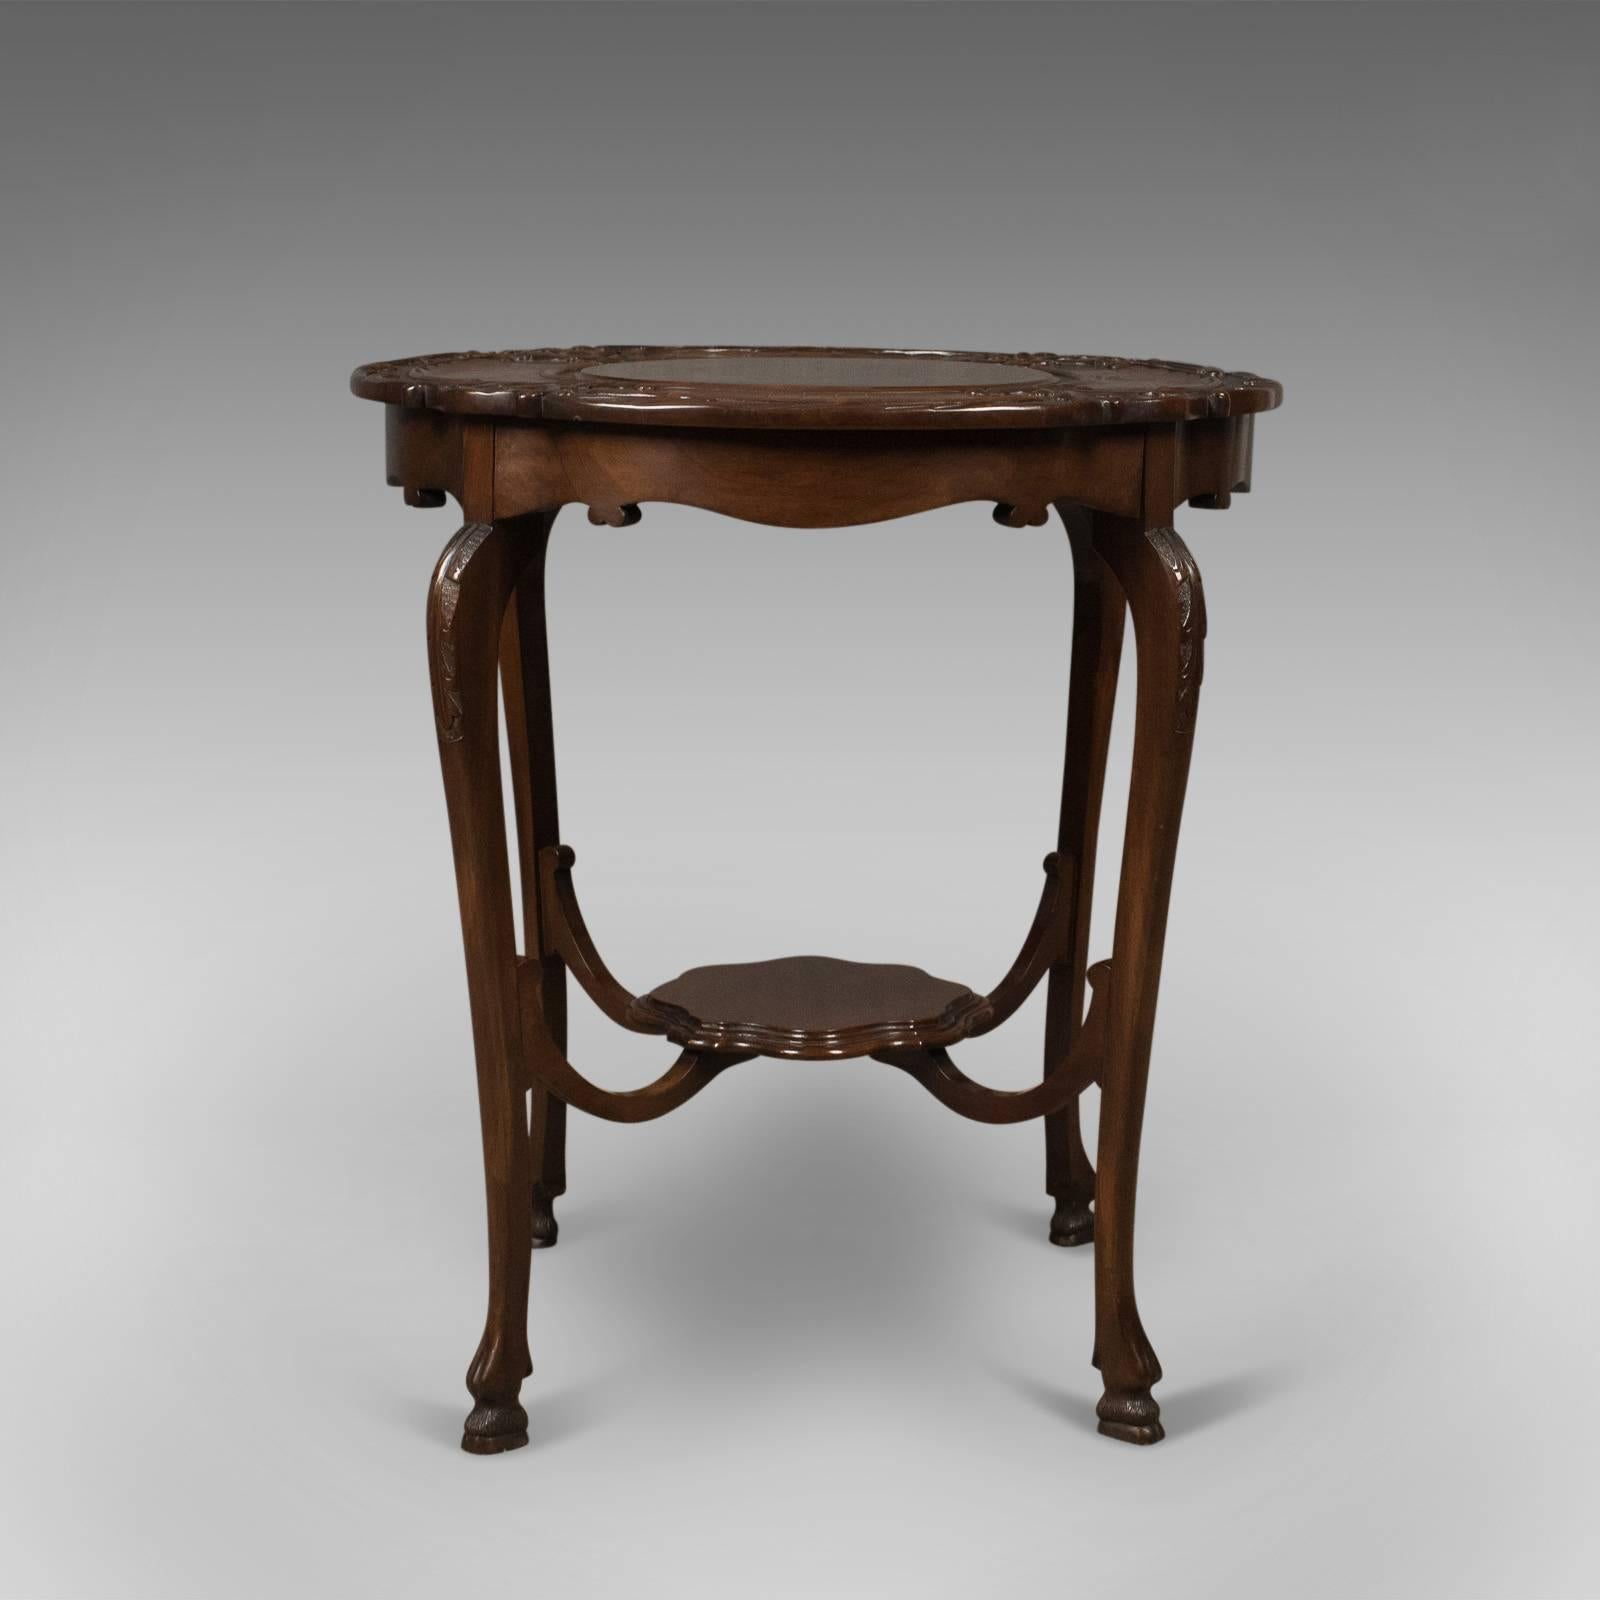 This is an antique display table, a Victorian mahogany side or lamp table, English, circa 1880.

Fine table in choice mahogany with interest from every angle
Raised on long sinuous cabriole legs with carved knee detail
Standing upon unusual,